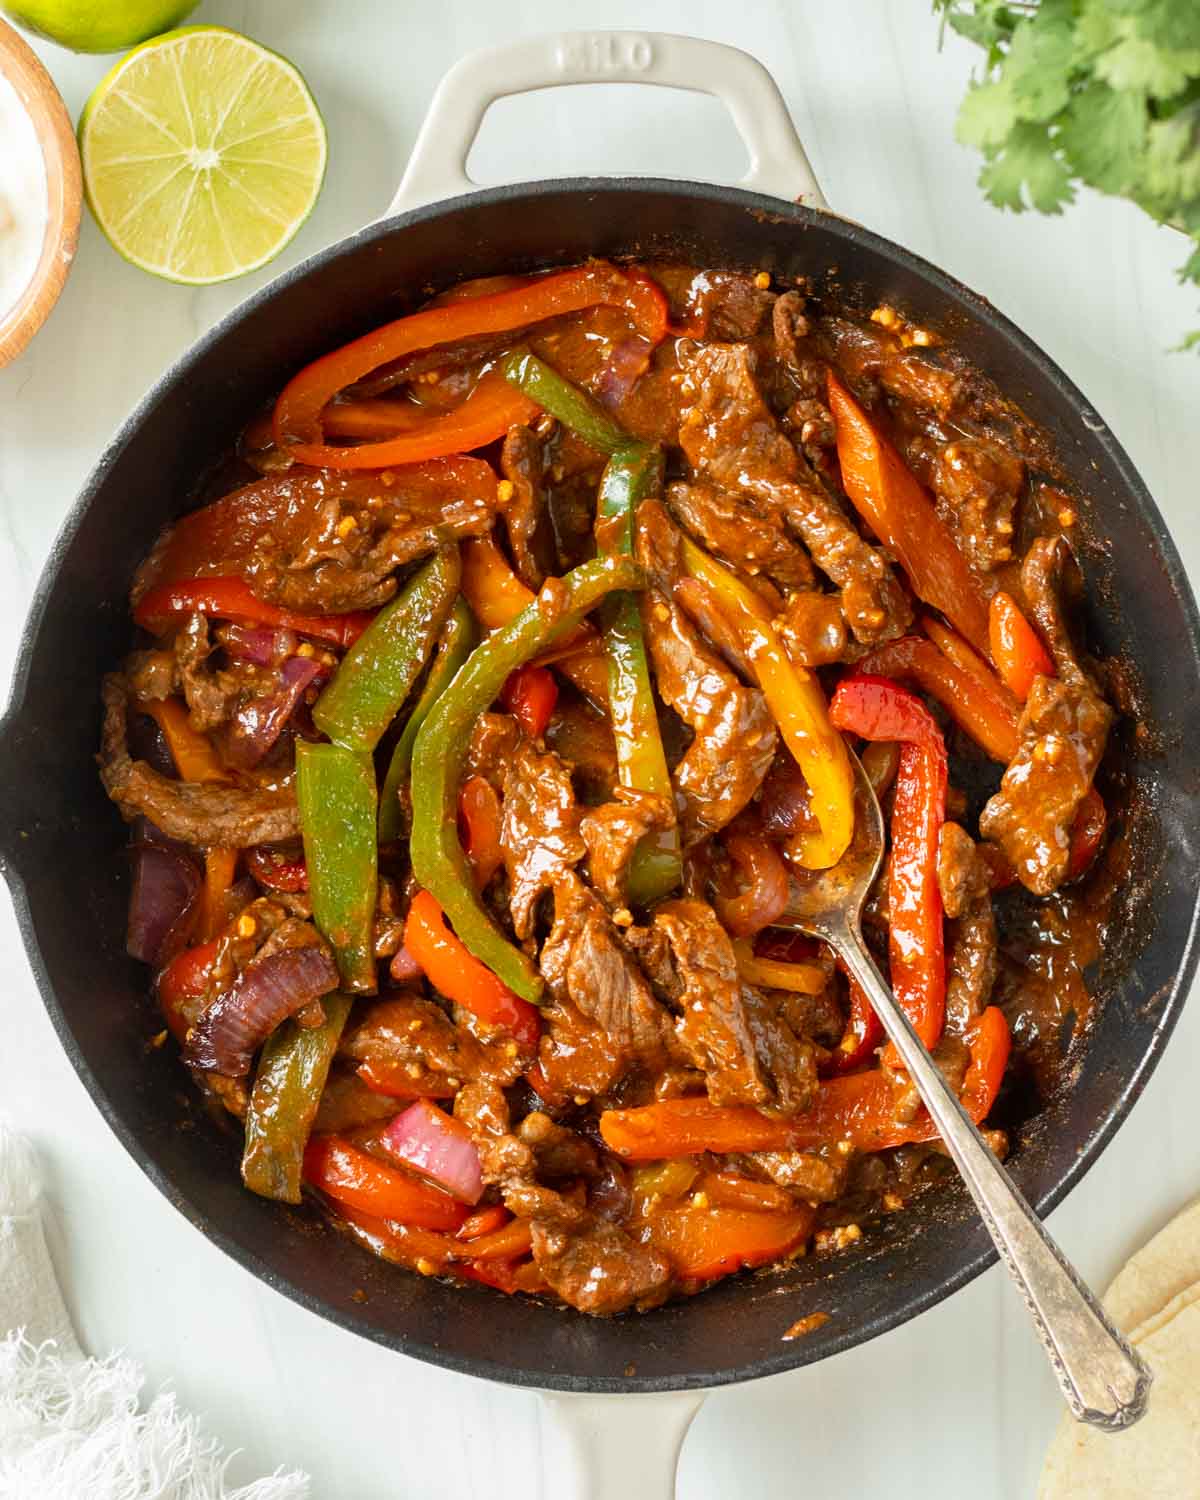 These steak fajitas are an easy one-pan recipe made with steak and vegetables cooked in a homemade fajita marinade for excellent flavor. This recipe is the perfect weeknight dinner and a kid-friendly meal.